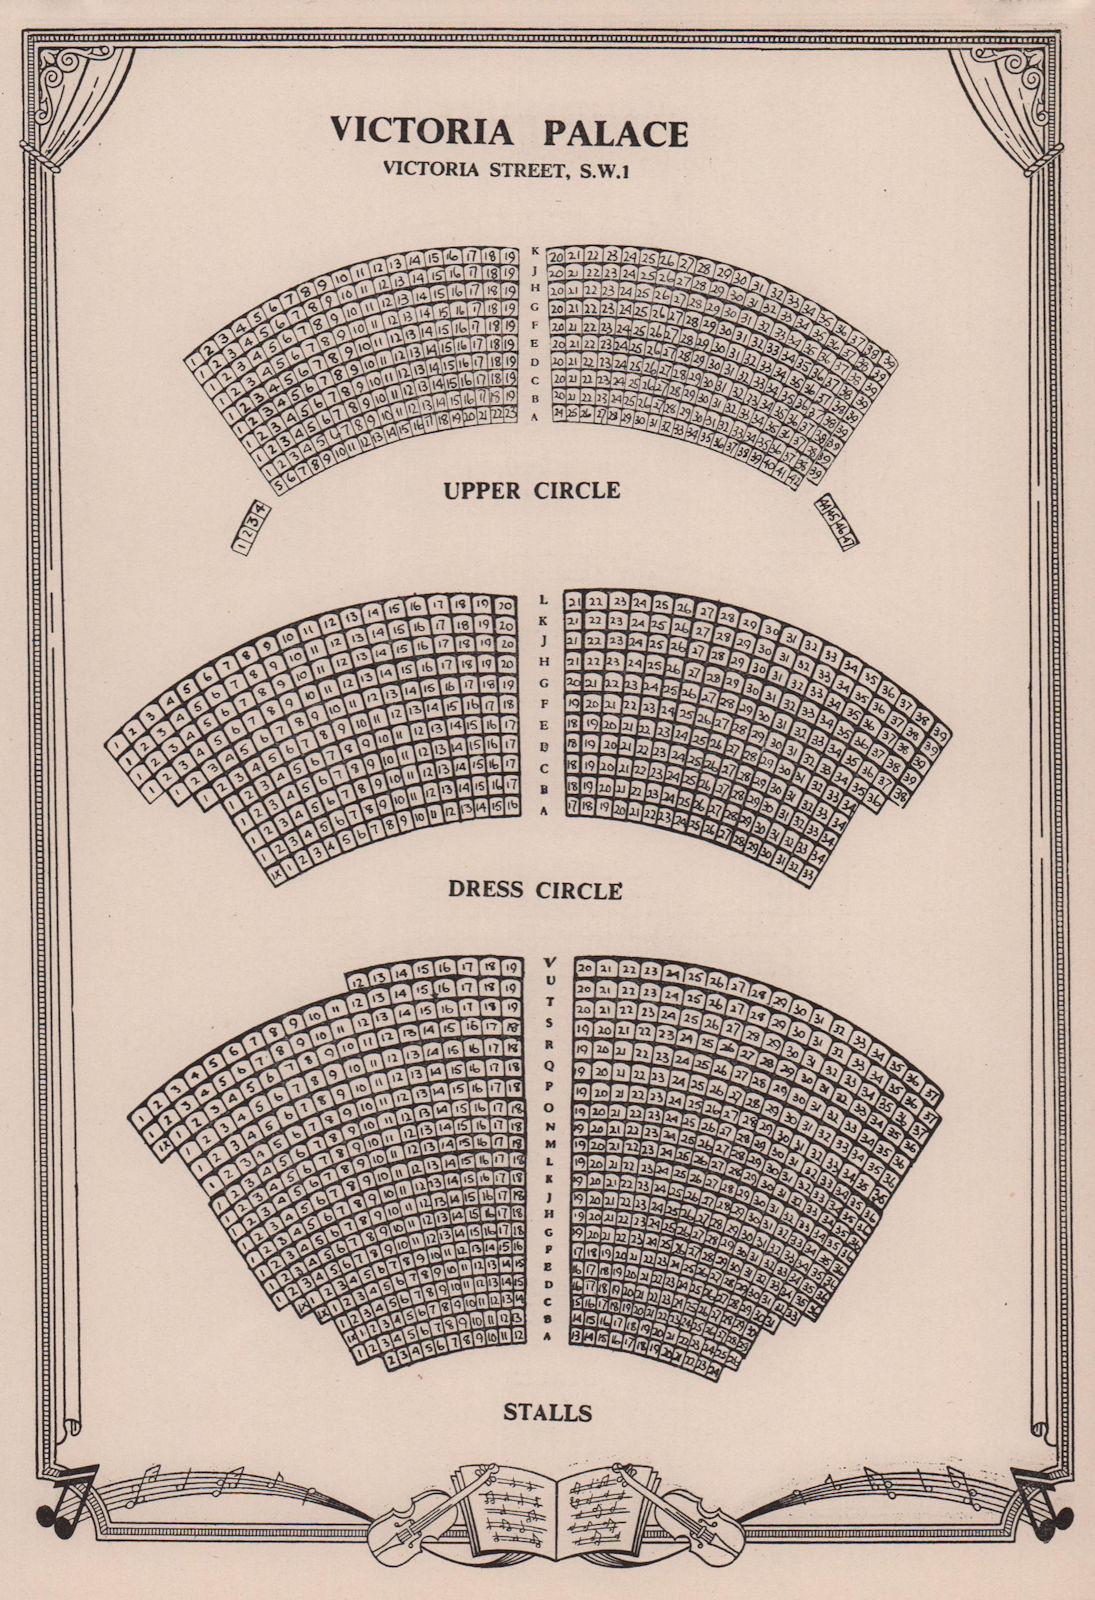 Associate Product Victoria Palace Theatre, Victoria Street, London. Vintage seating plan 1955